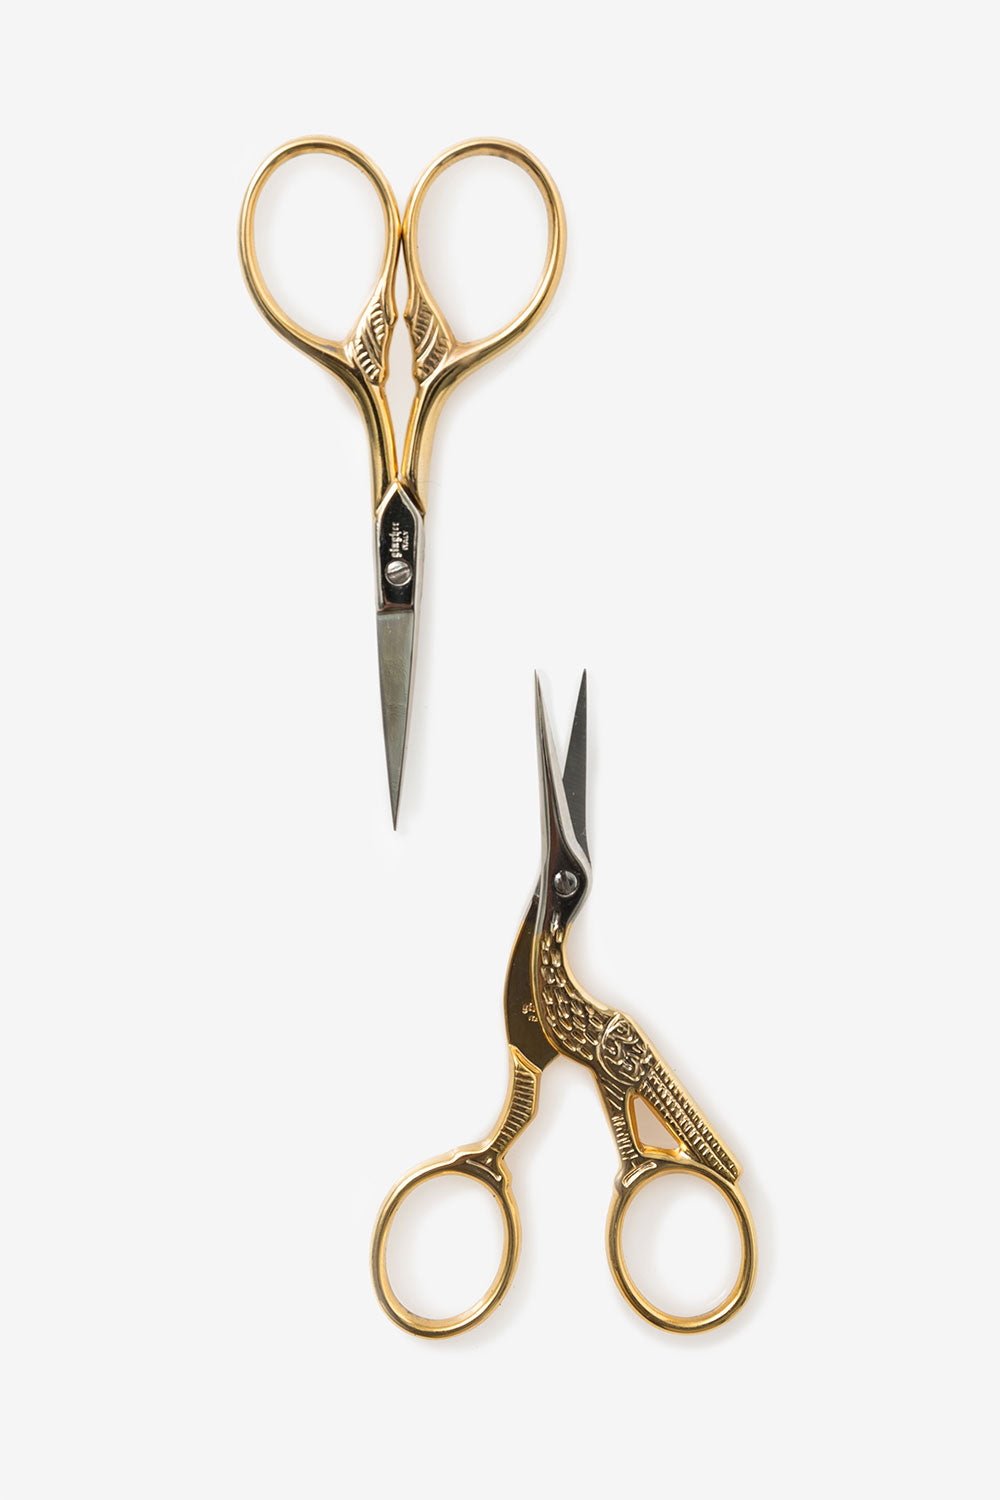 image of Gold-Handled Embroidery Scissors